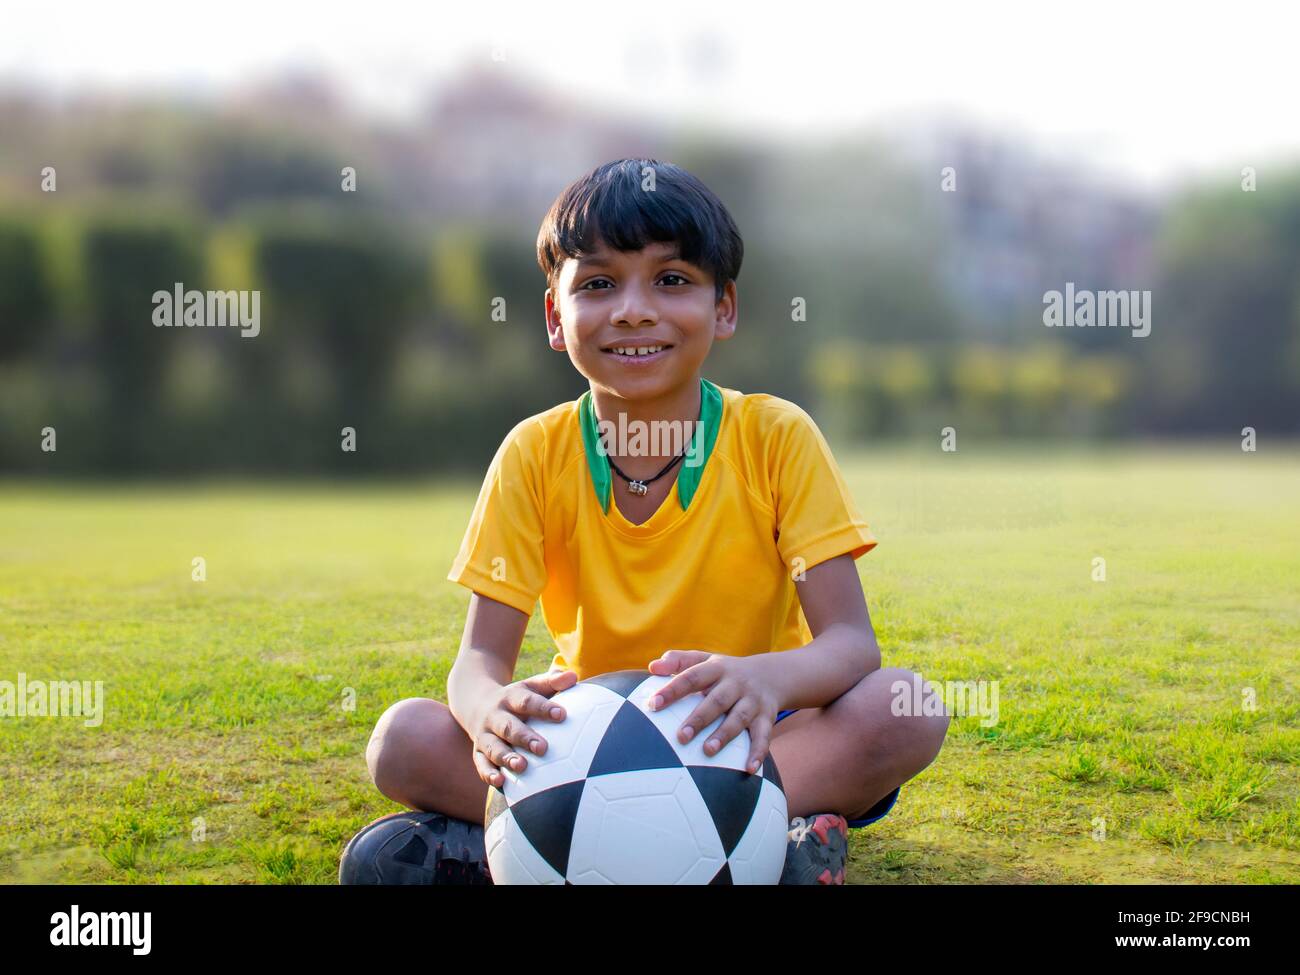 Young boy sitting in the ground holding soccer ball Stock Photo